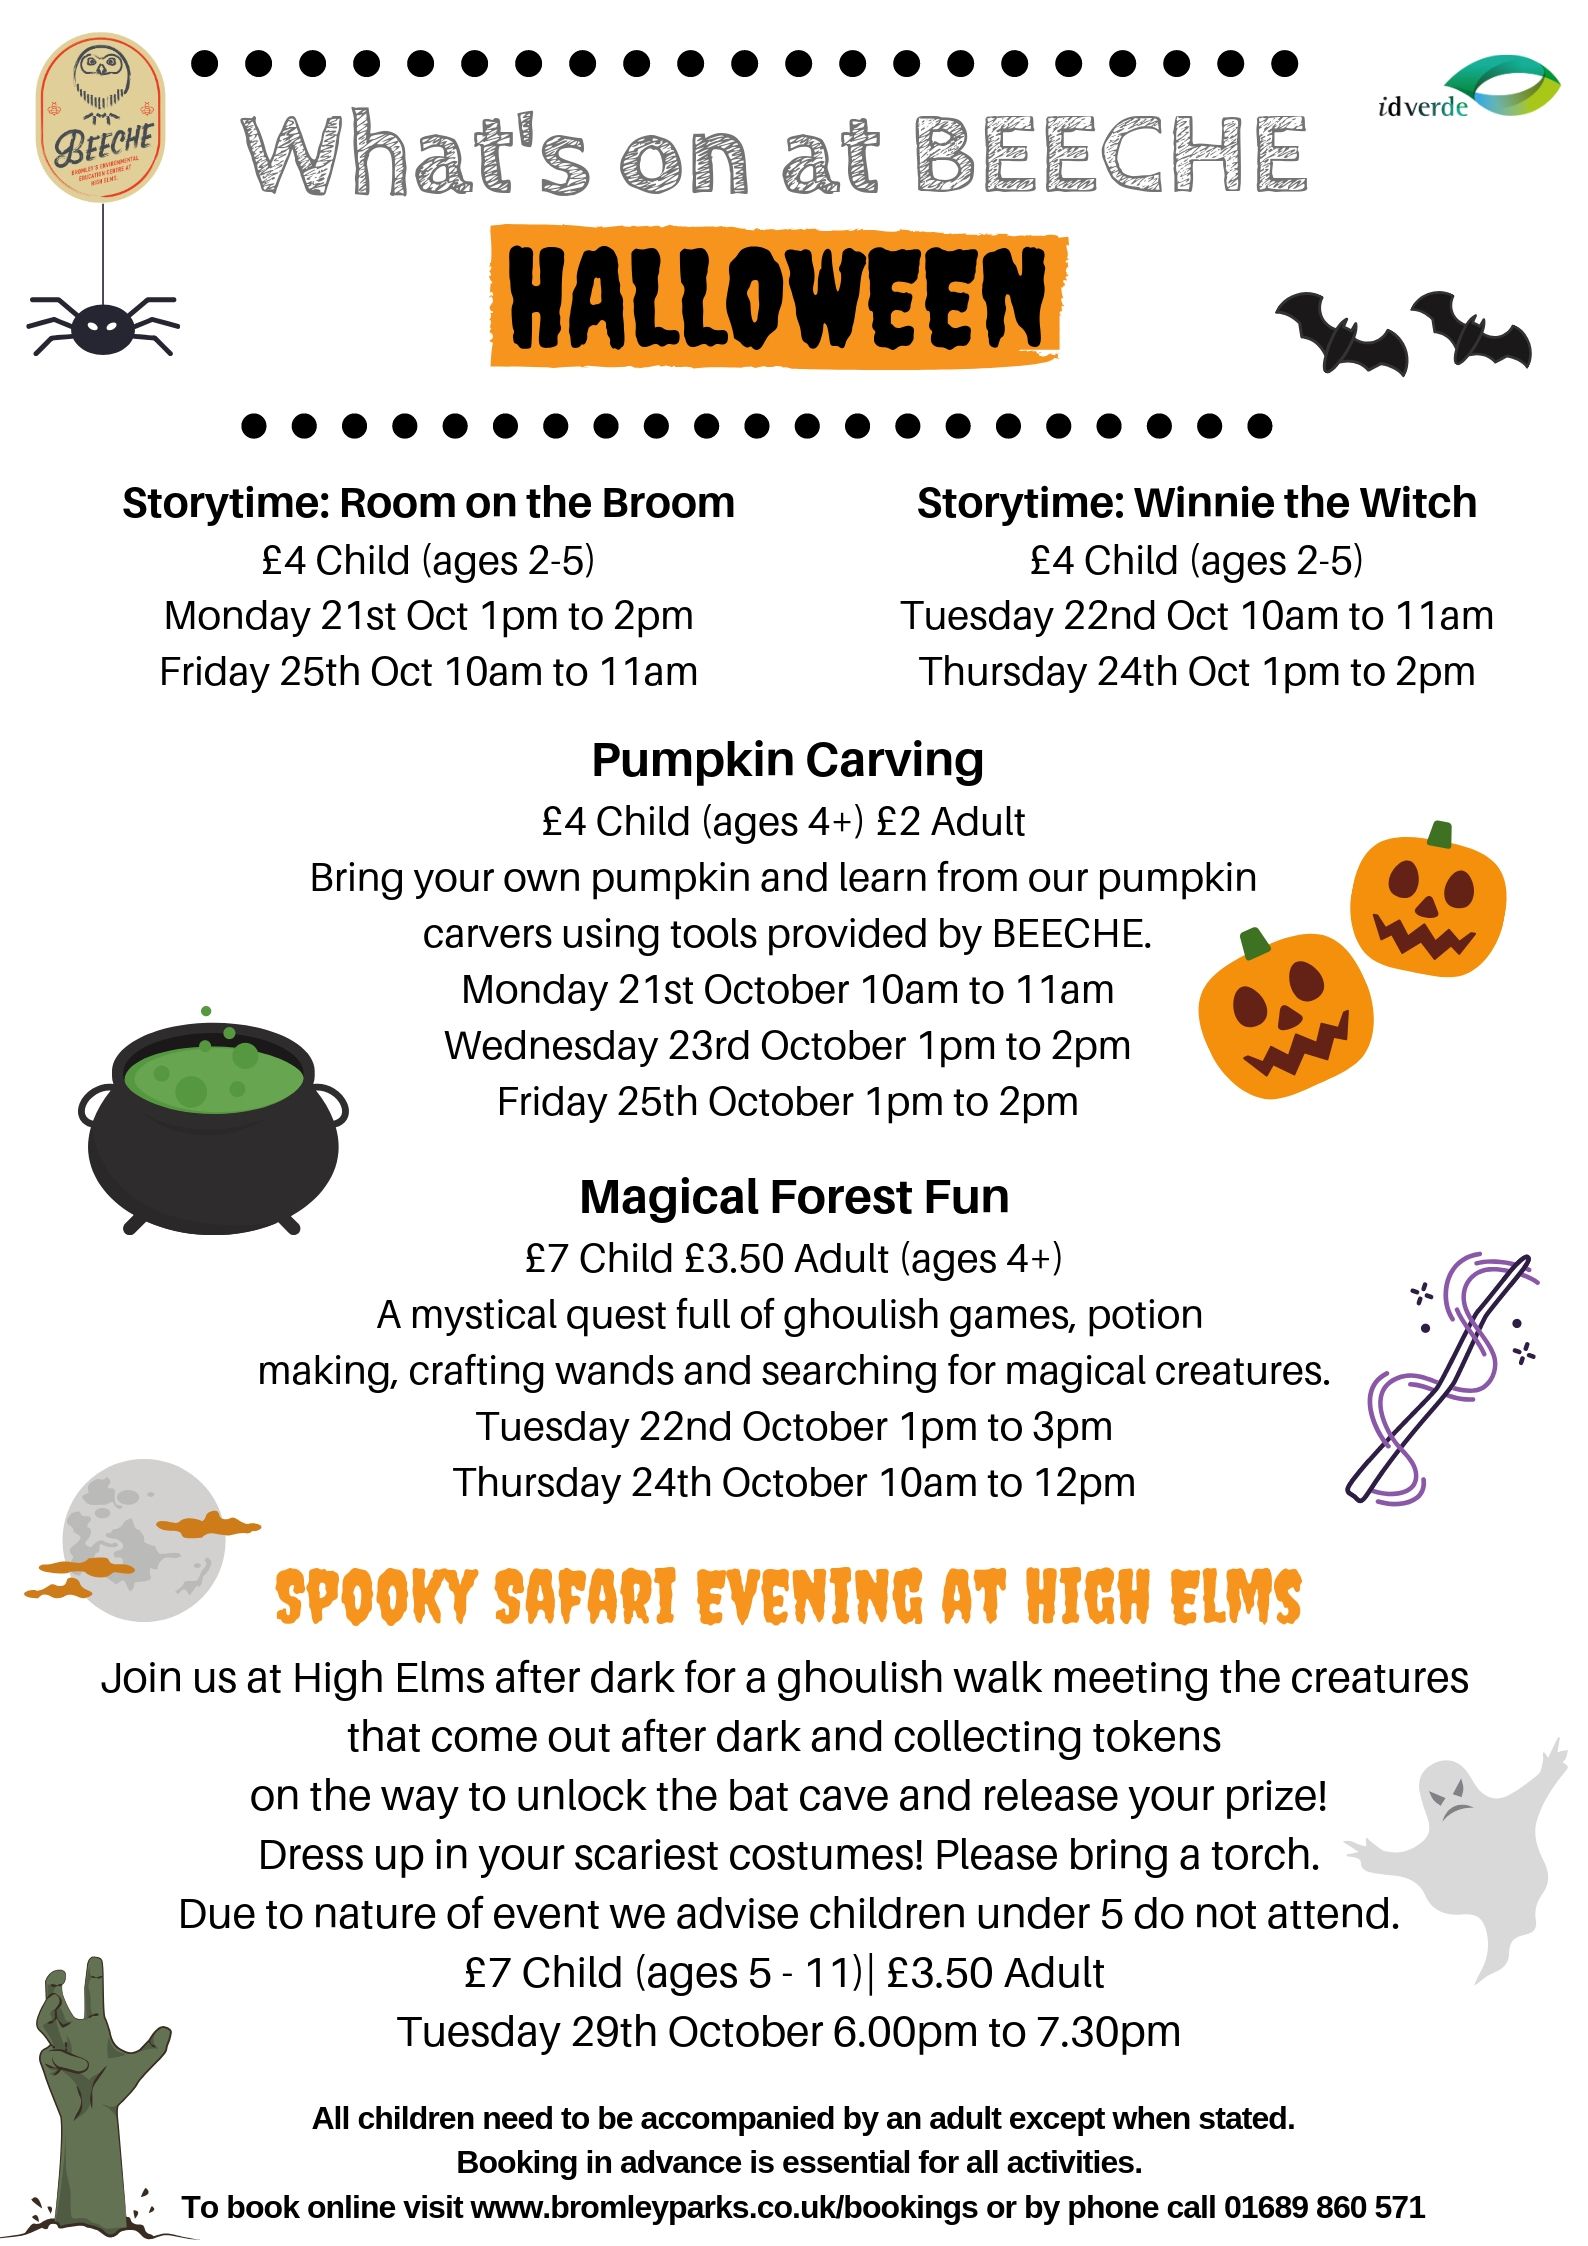 Whats on Halloween - Bromley Parks